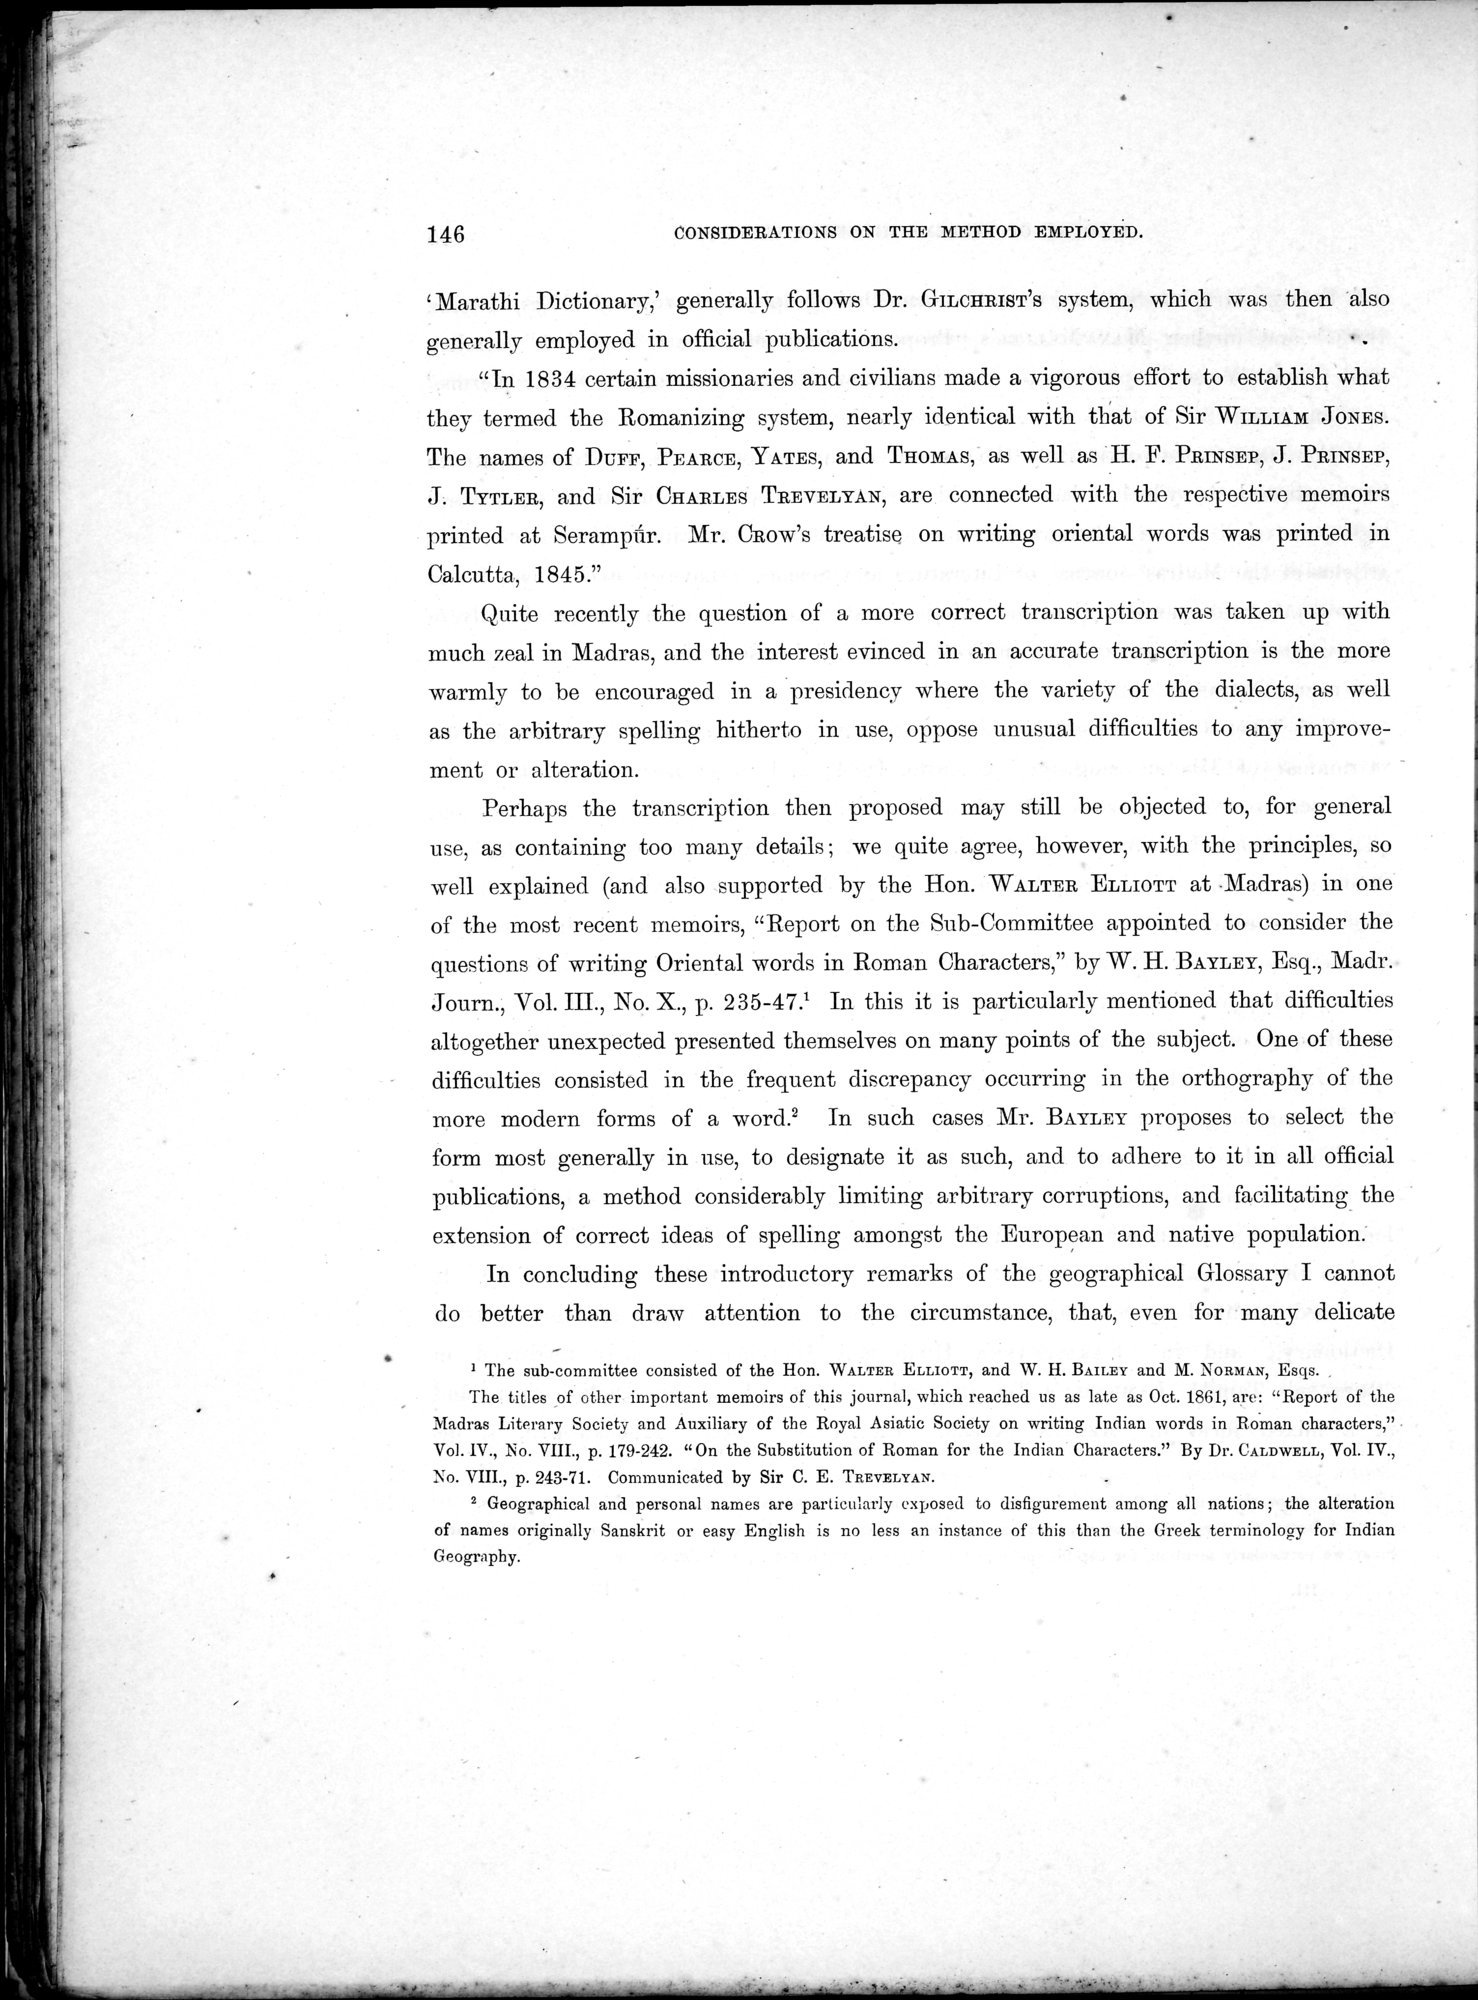 Results of a Scientific Mission to India and High Asia : vol.3 / Page 178 (Grayscale High Resolution Image)